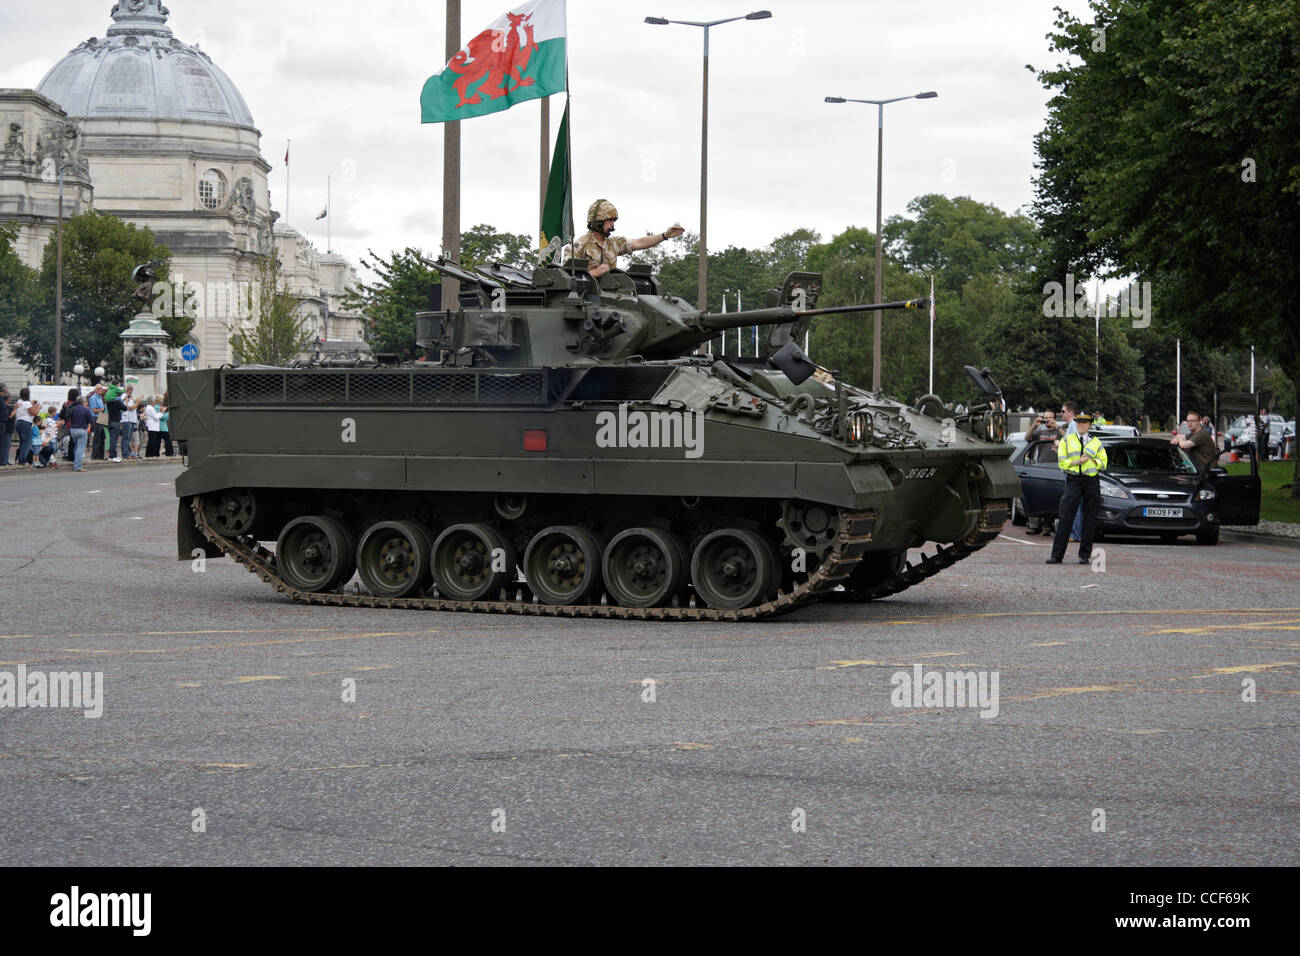 The Royal Welsh regiment parade through the streets of Cardiff Wales return from active duty in August 2009. Armoured vehicle British Army Stock Photo